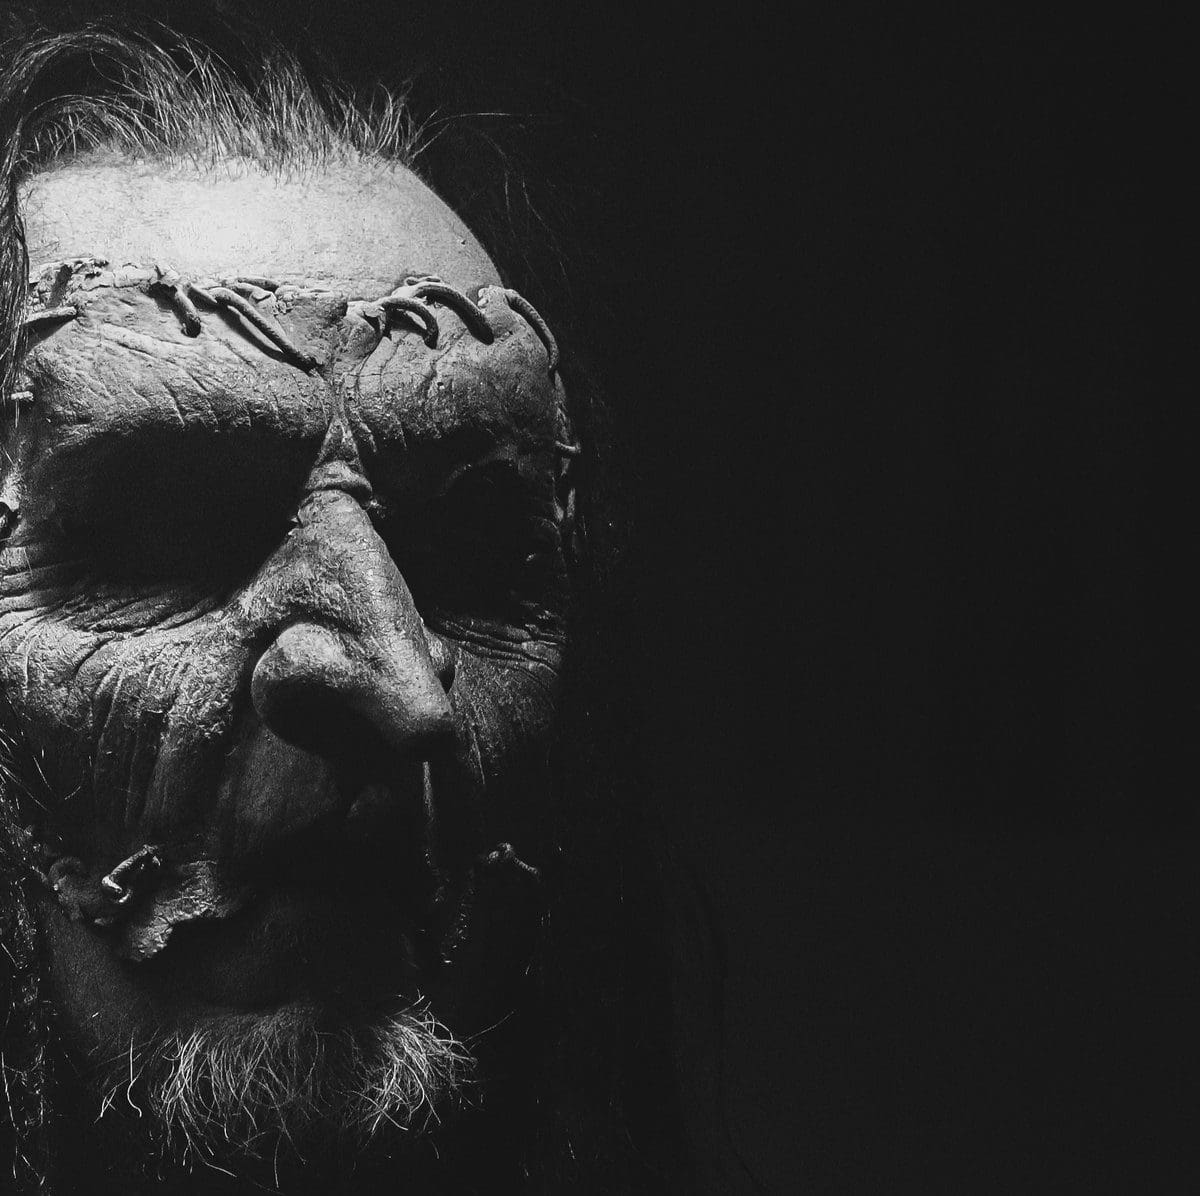 Mortiis releases 2 more tracks from new upcoming album for subscribers on Bandcamp